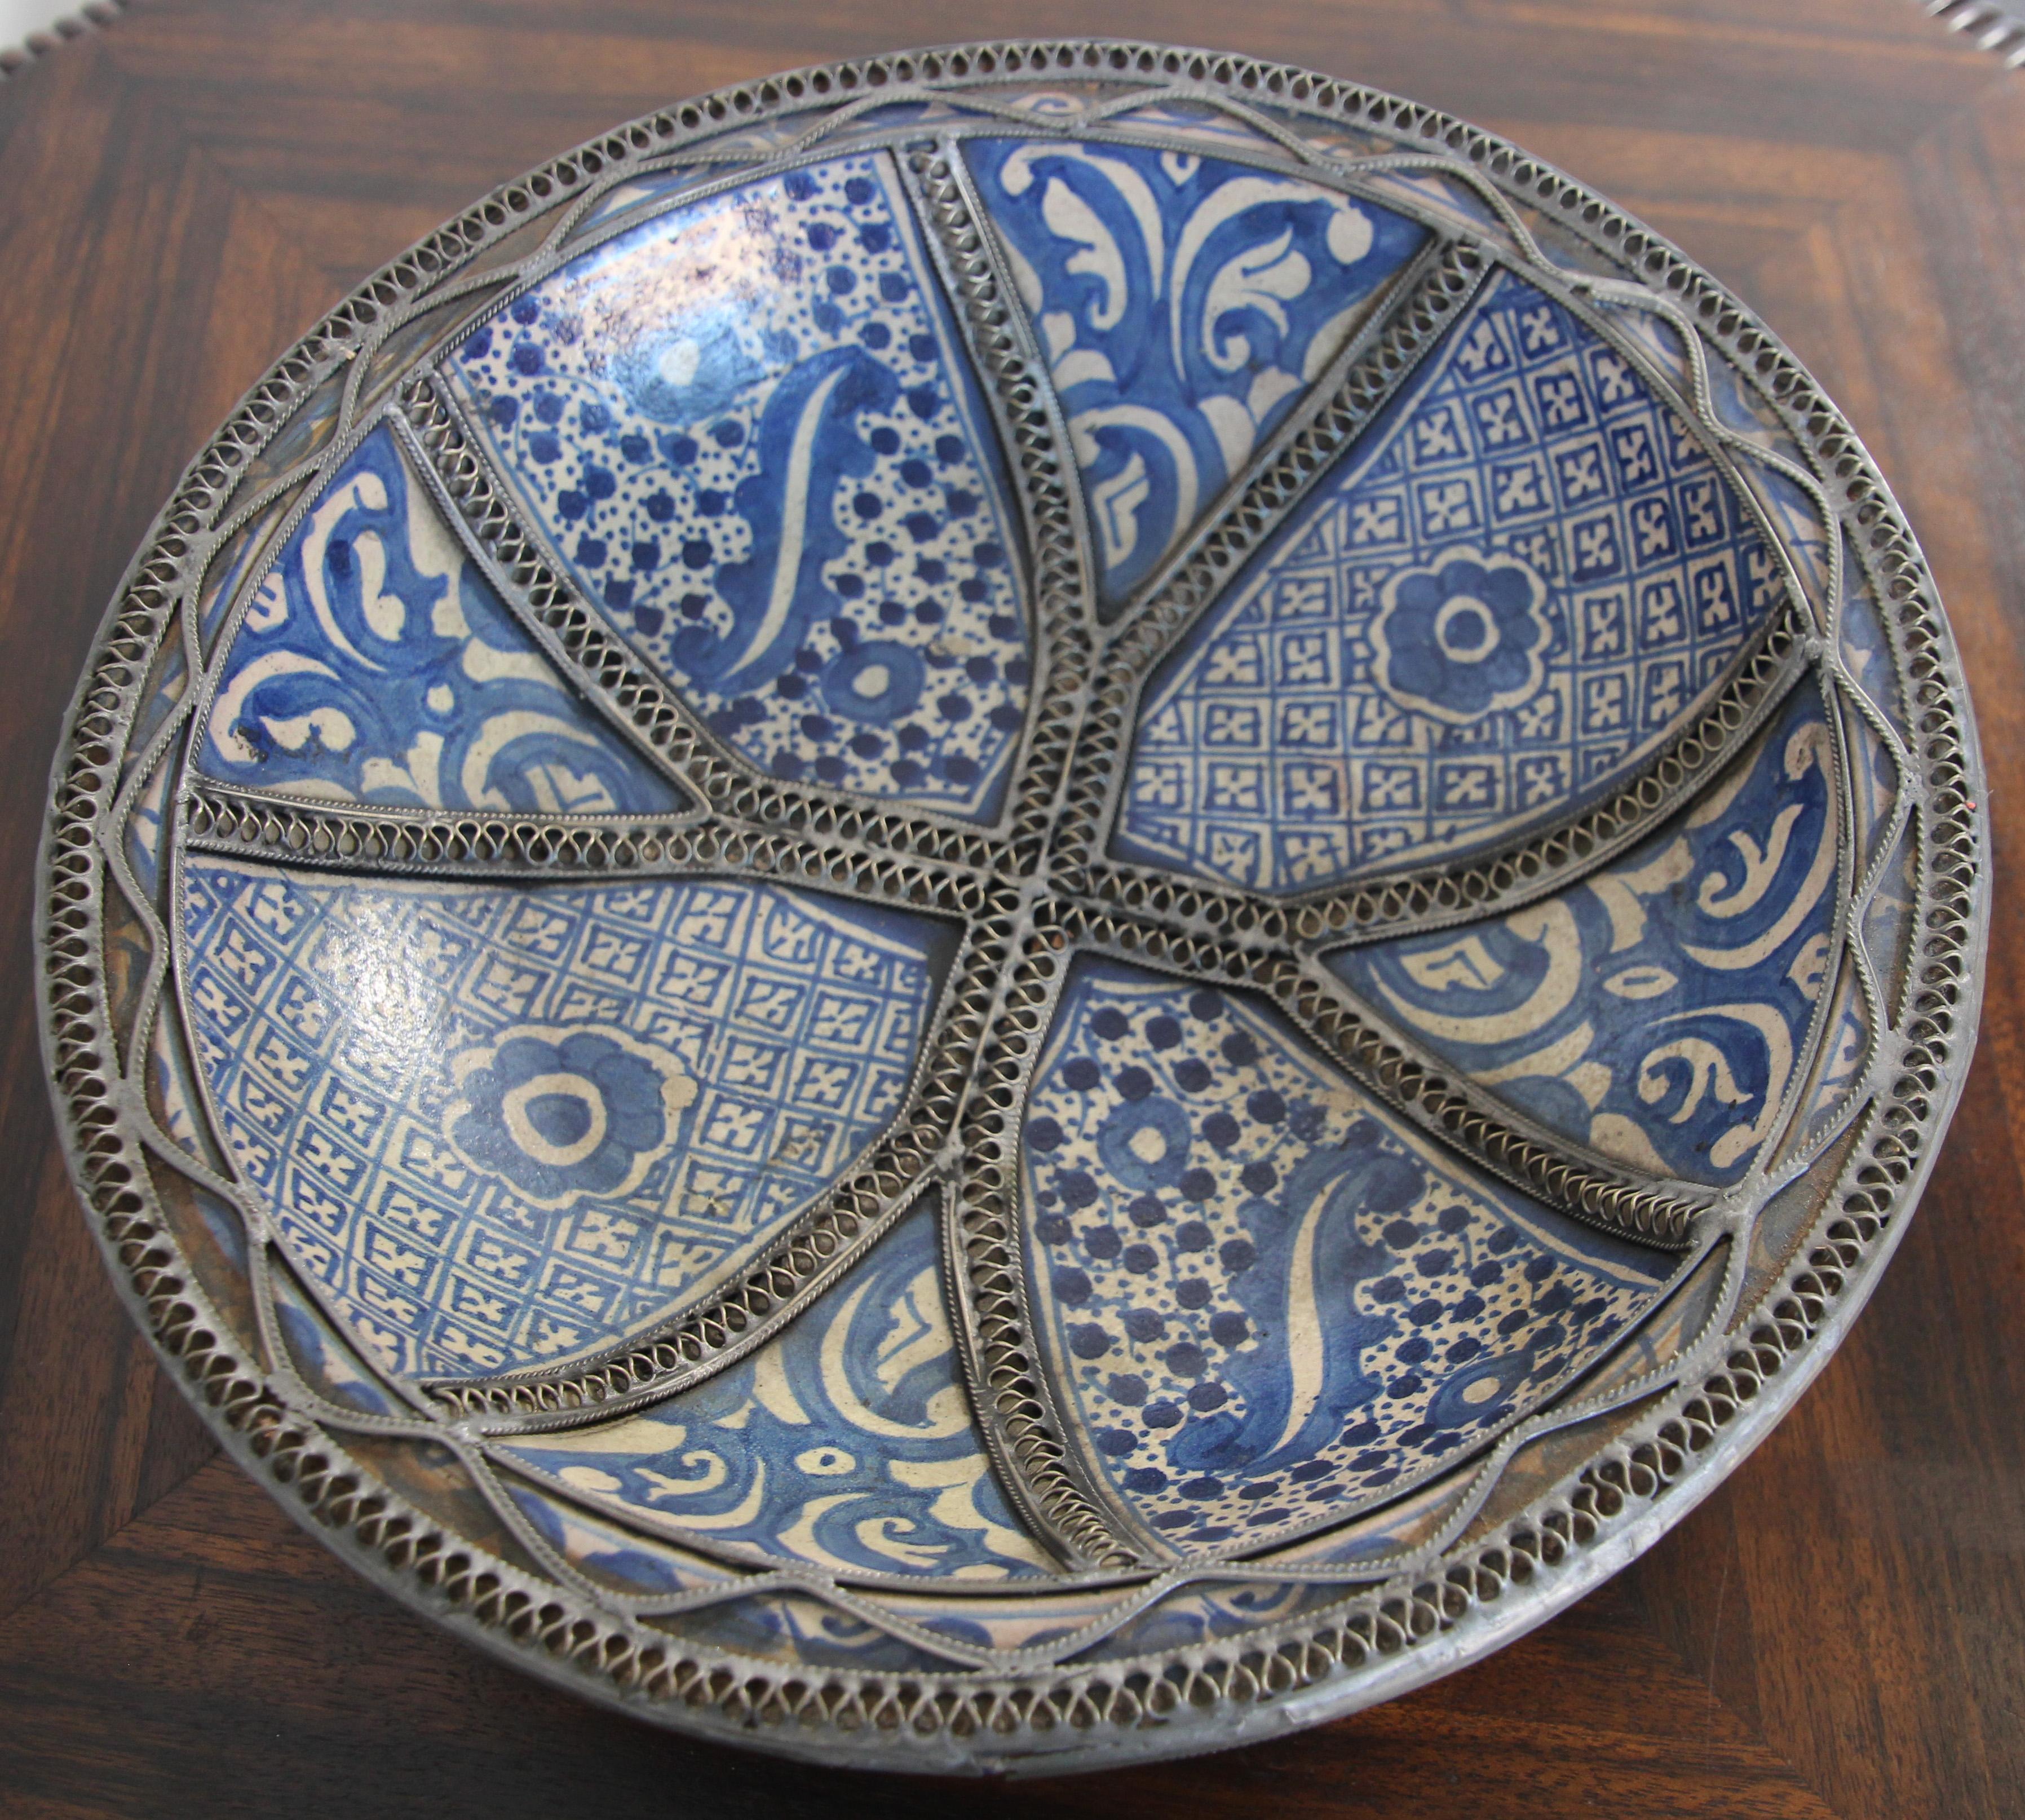 Handcrafted Moorish Moroccan Bleu de Fez decorative ceramic Bowl, dish. 
Ceramic bowl in Bleu de Fez, very nice designs hand painted by artist in Fez.
Geometrical and floral Moorish designs and adorned with nickel silver filigree designs.
Glazed